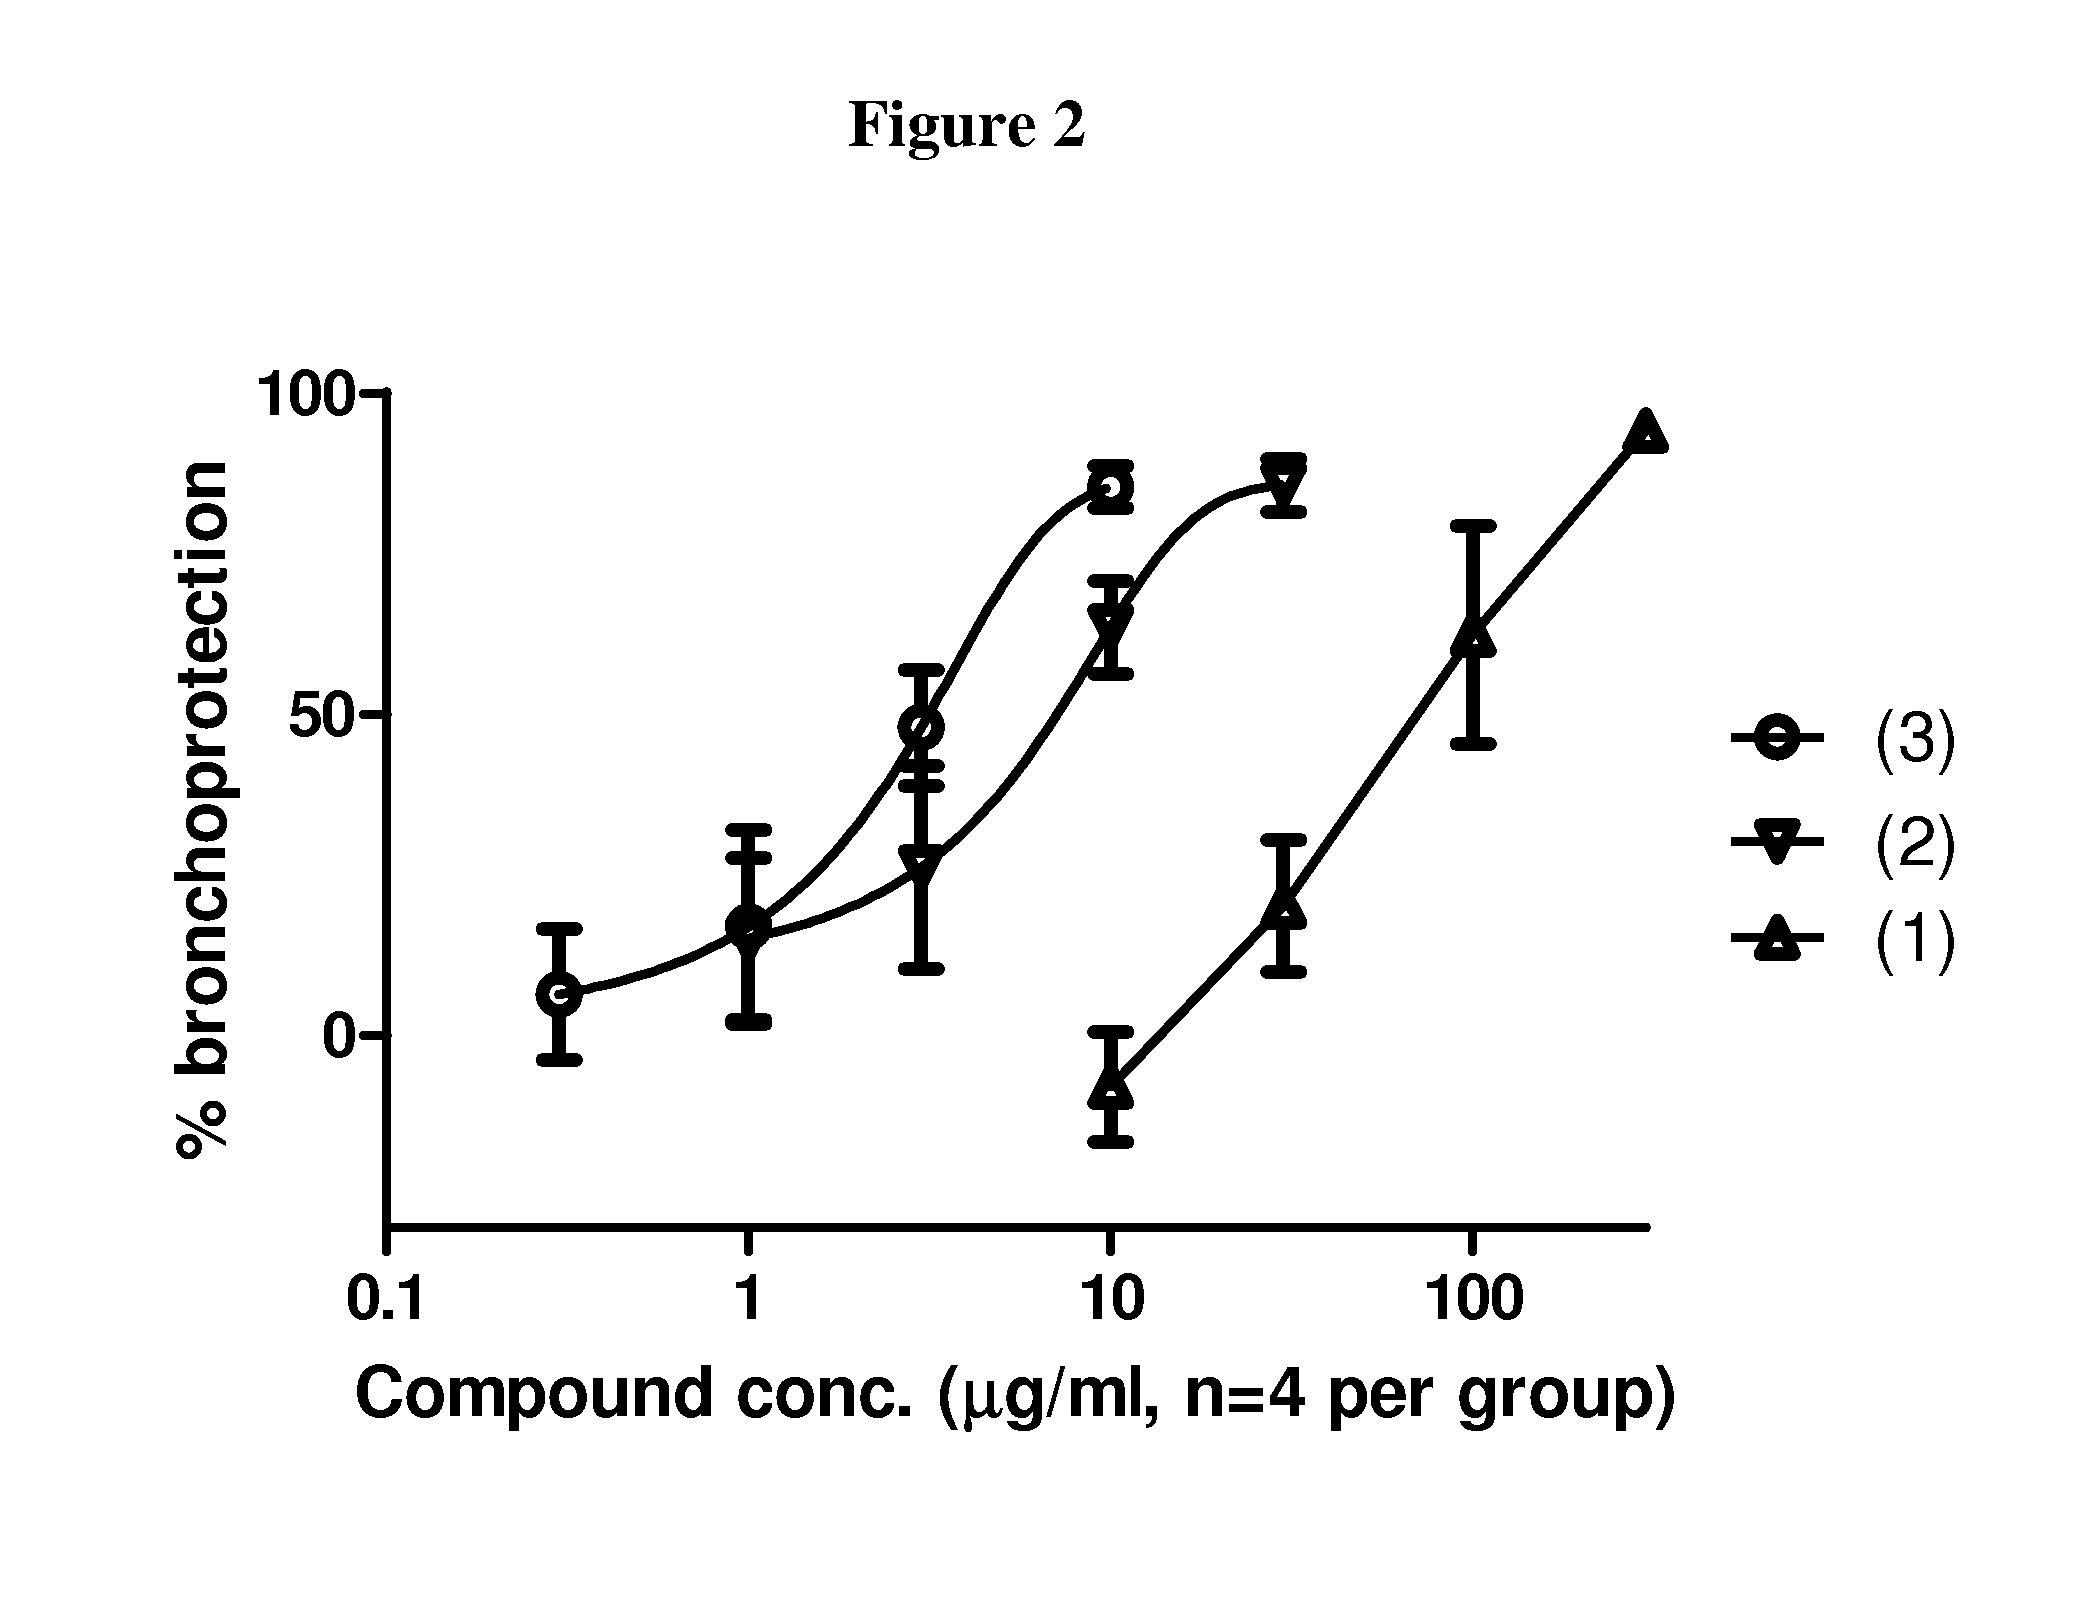 7-azoniabicyclo [2.2.1] heptane derivatives, methods of production, and pharmaceutical uses thereof